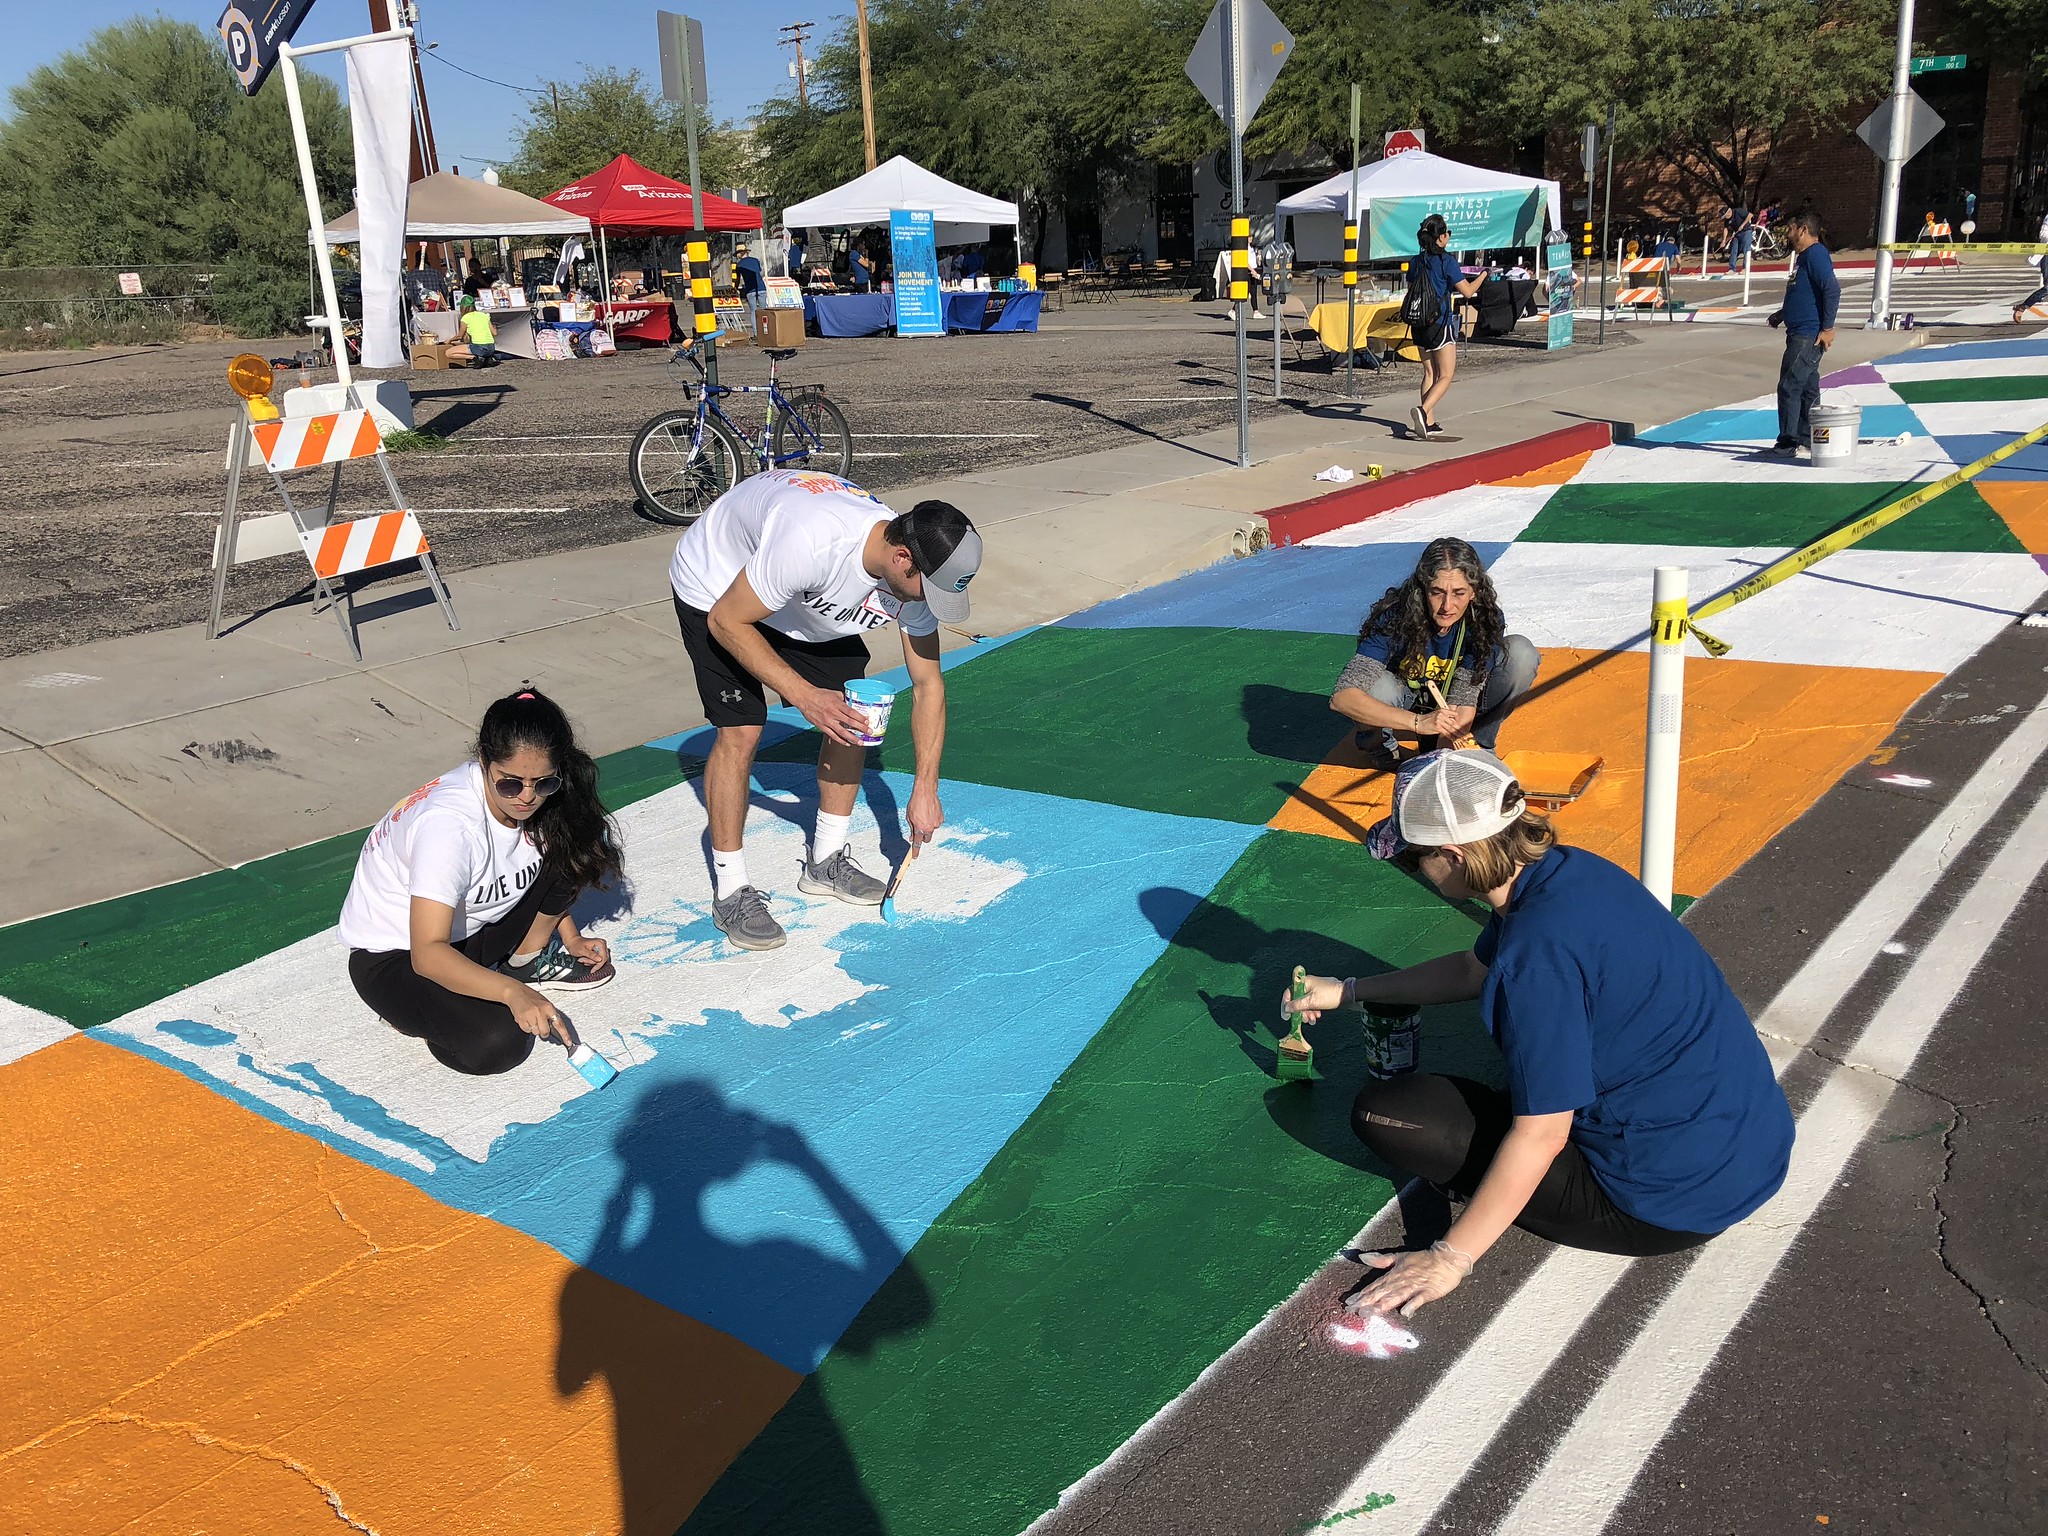 Tucson: Complete Streets is about more than pavement